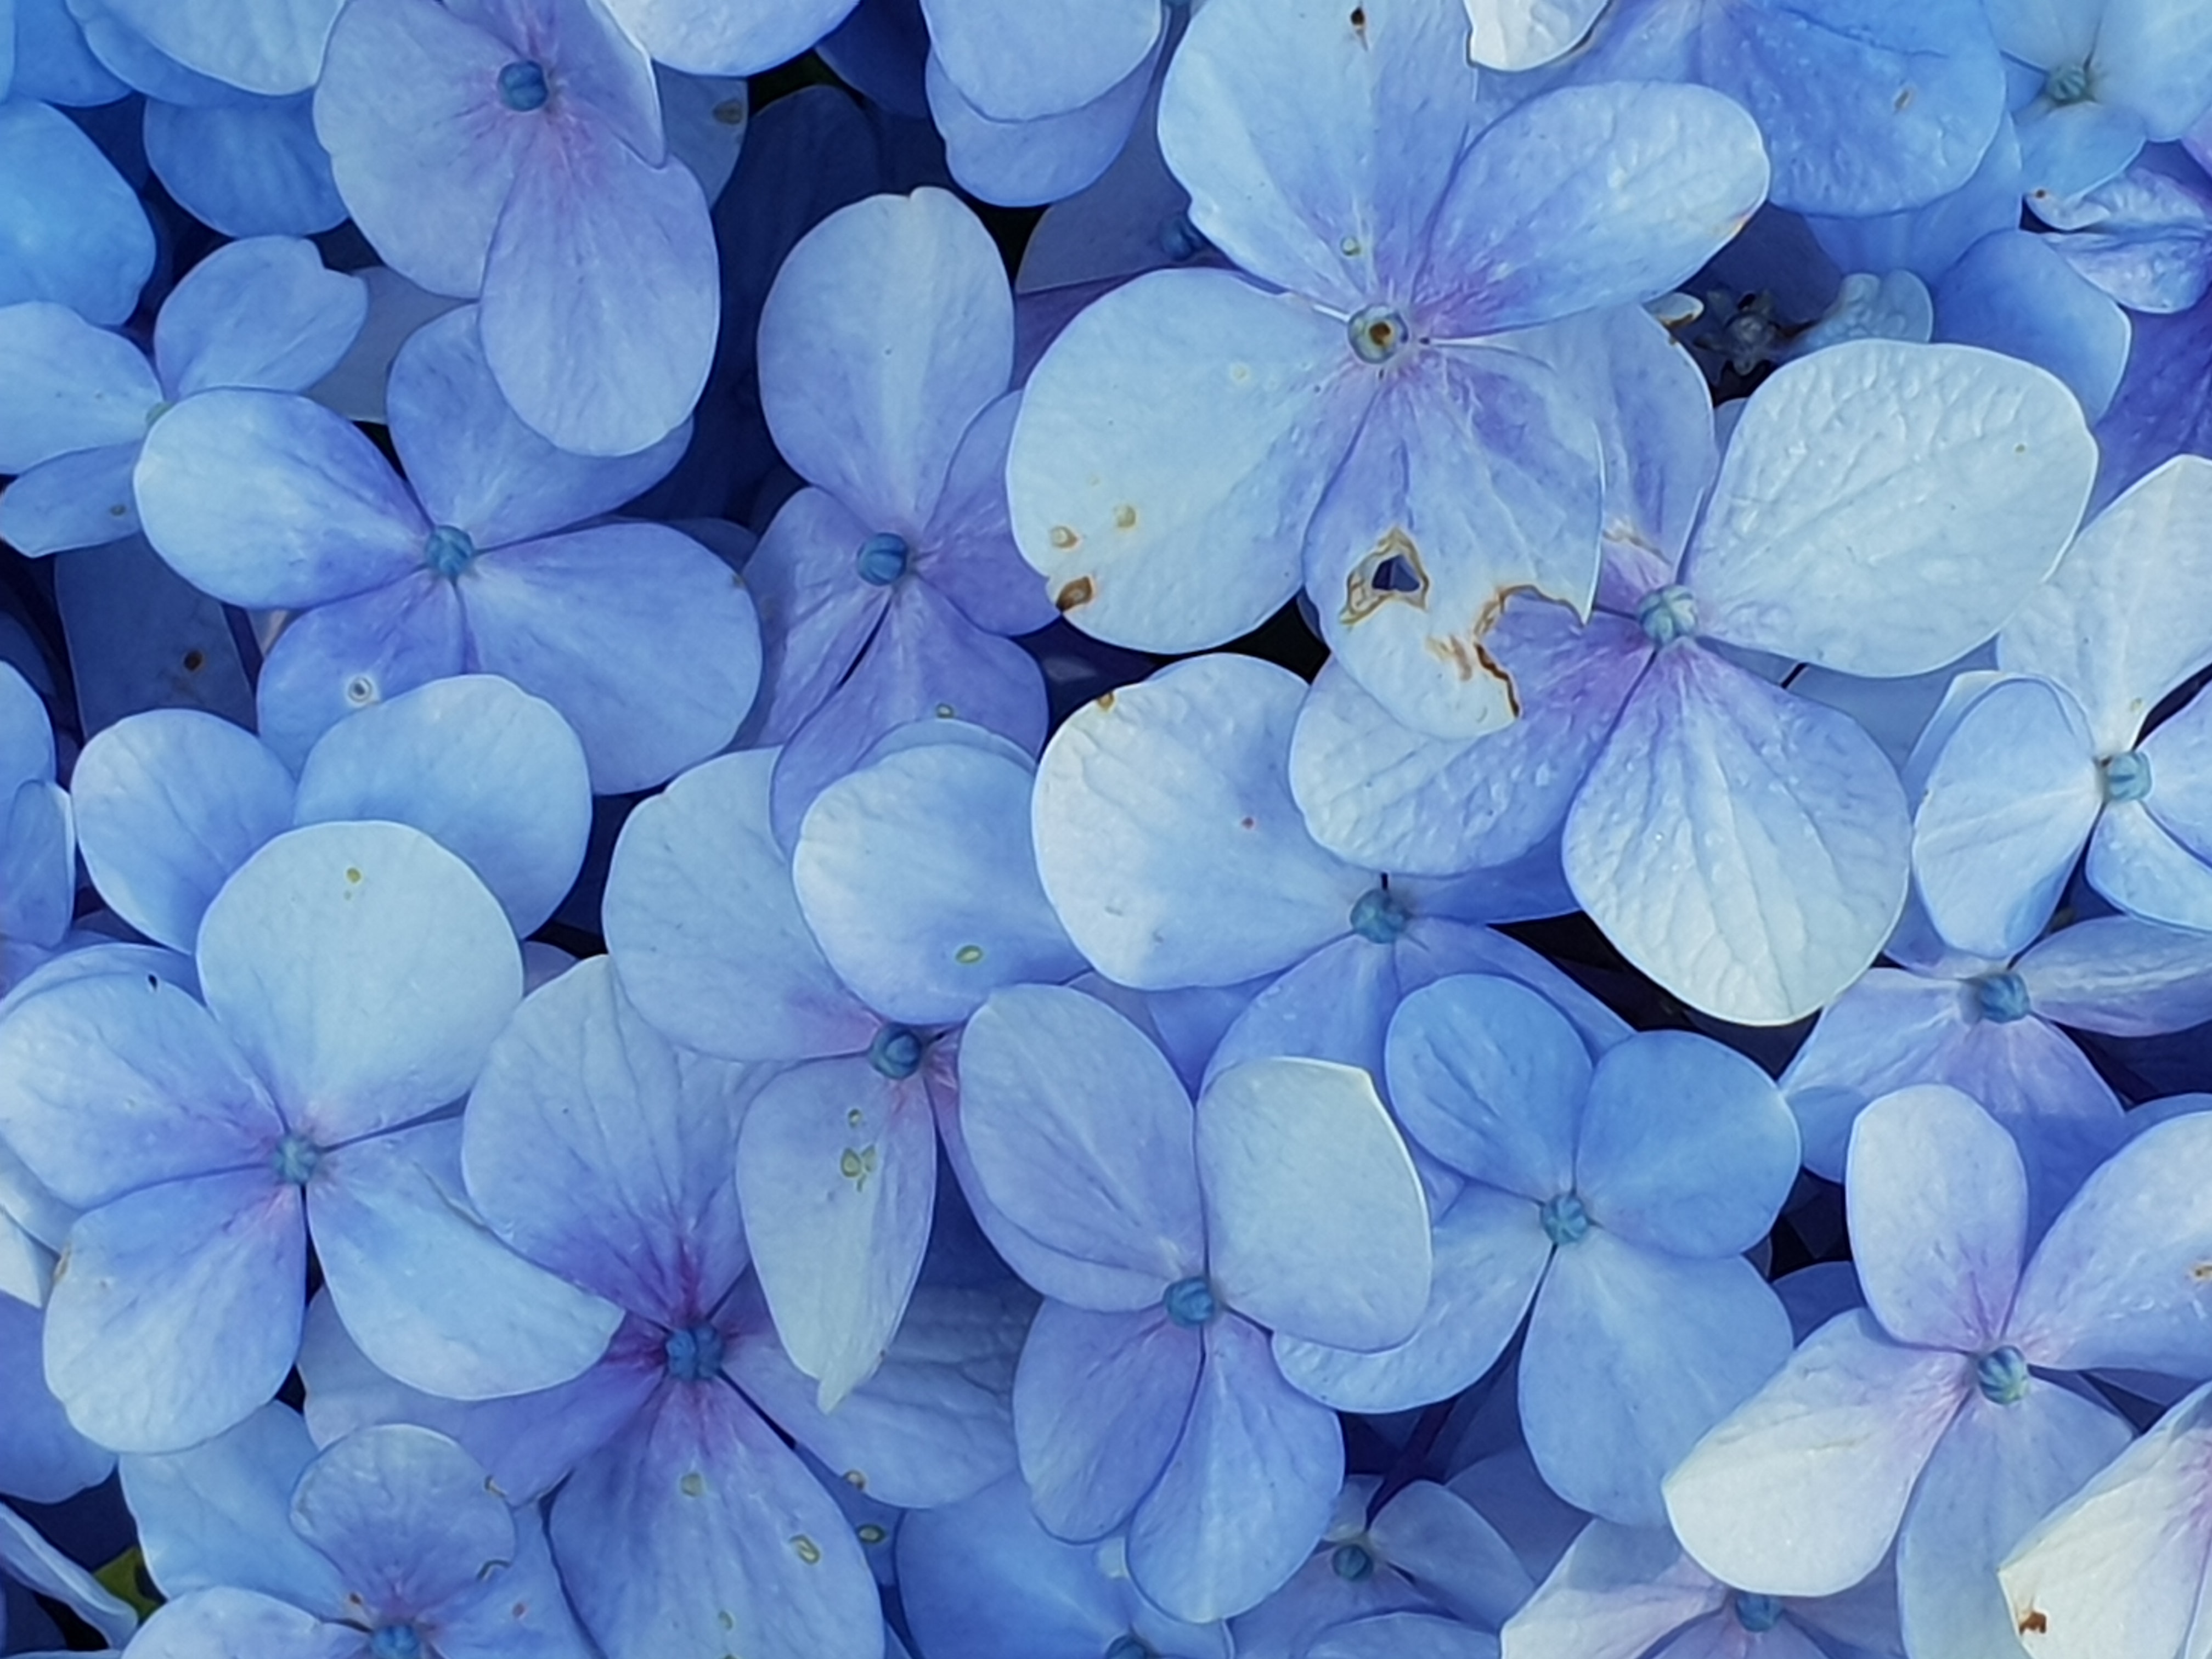 Close-up Photo of Blue Petaled Flowers, Growth, Texture, Summer, Spring, HQ Photo